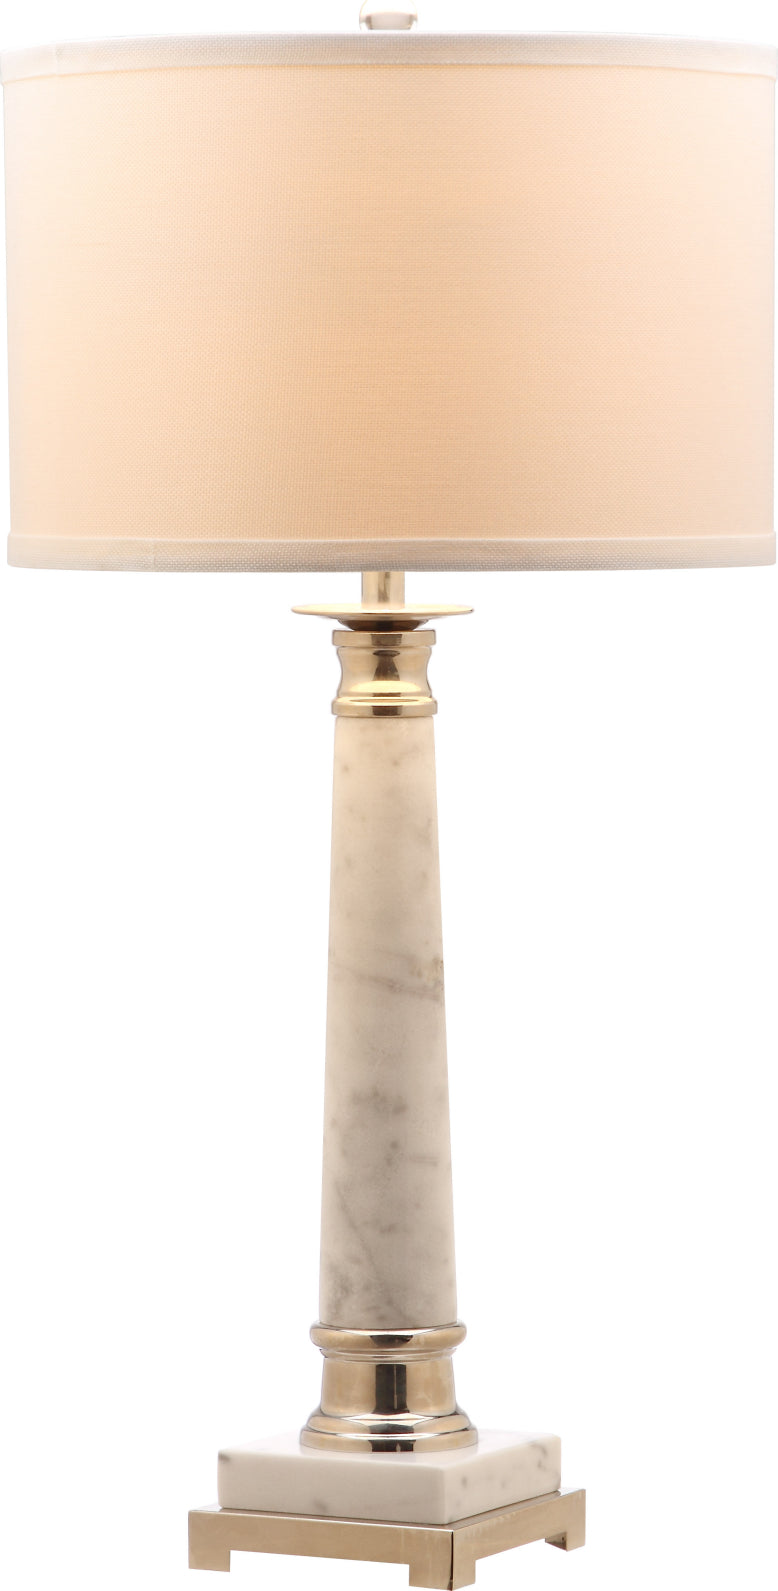 Safavieh Colleen 31-Inch H Table Lamp White Marble main image